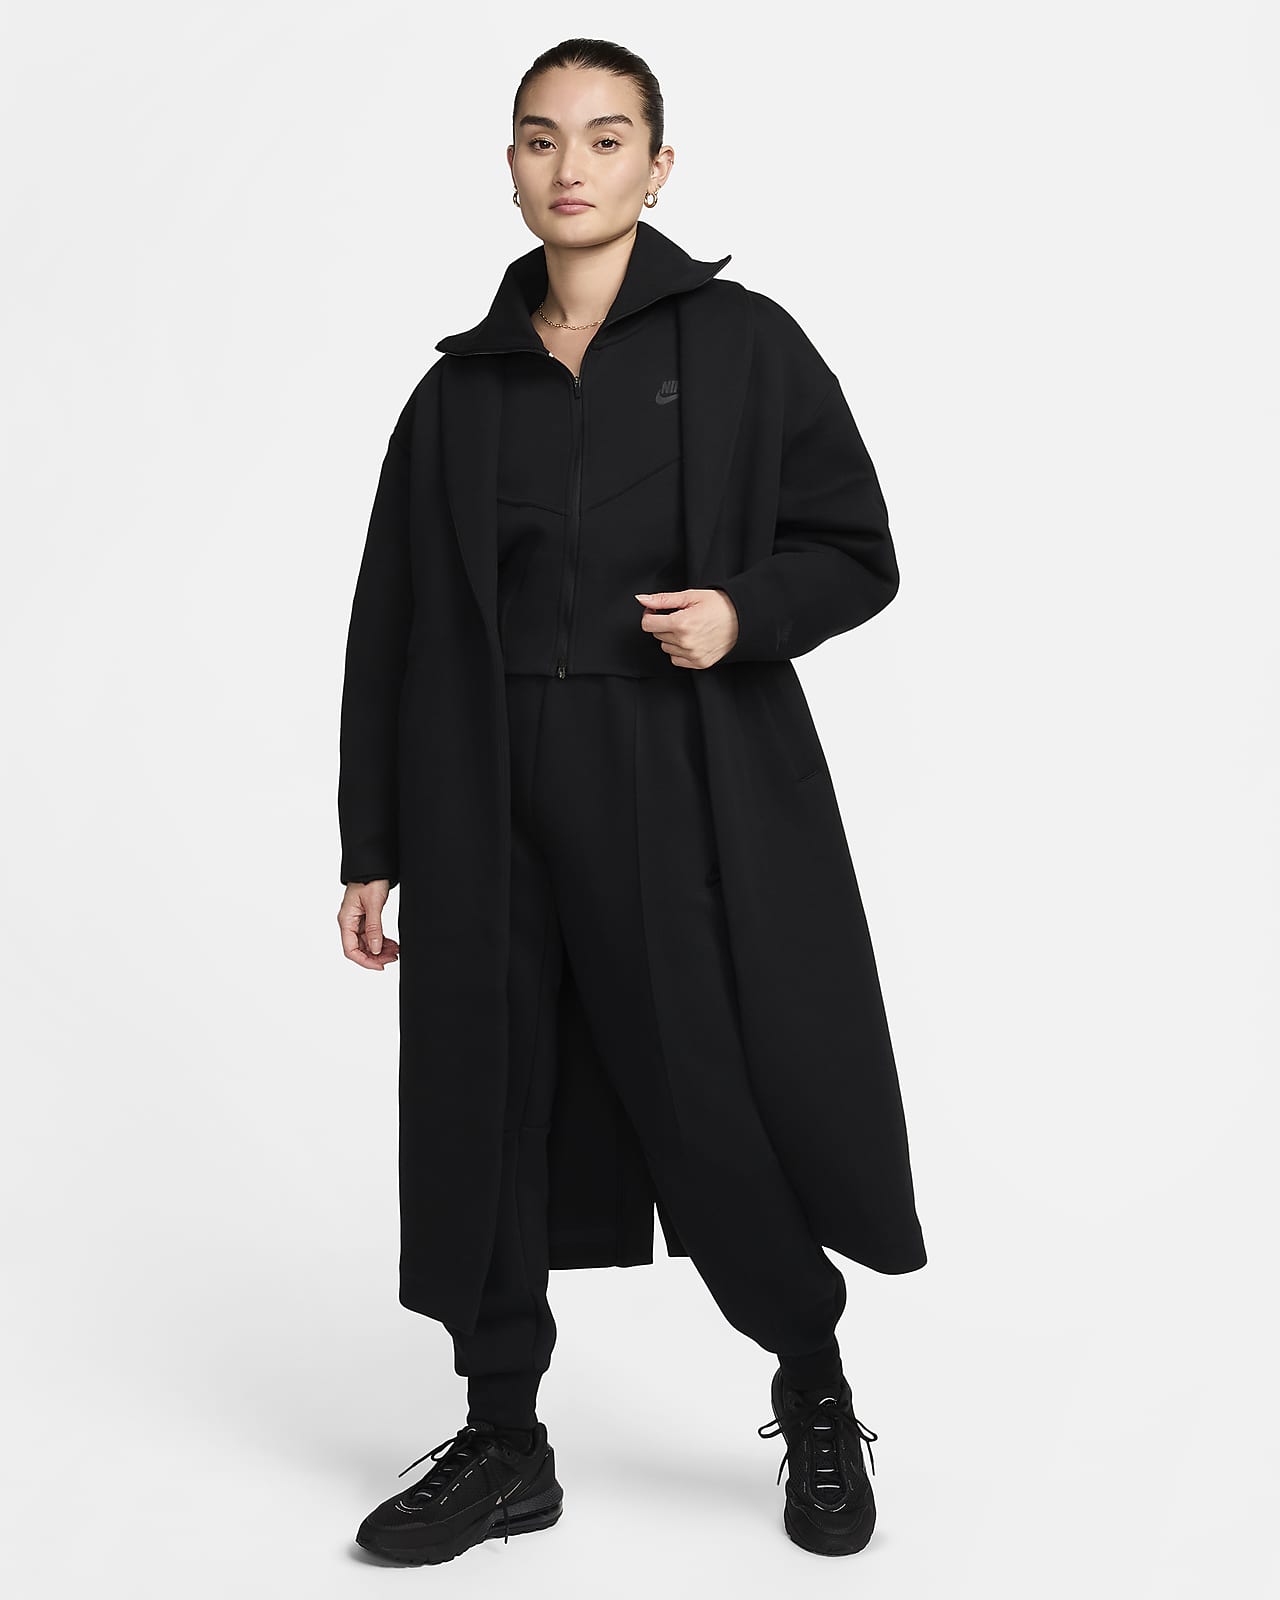 Coat Long Jacket Cloak Cape Duster Outwear for Holiday Black